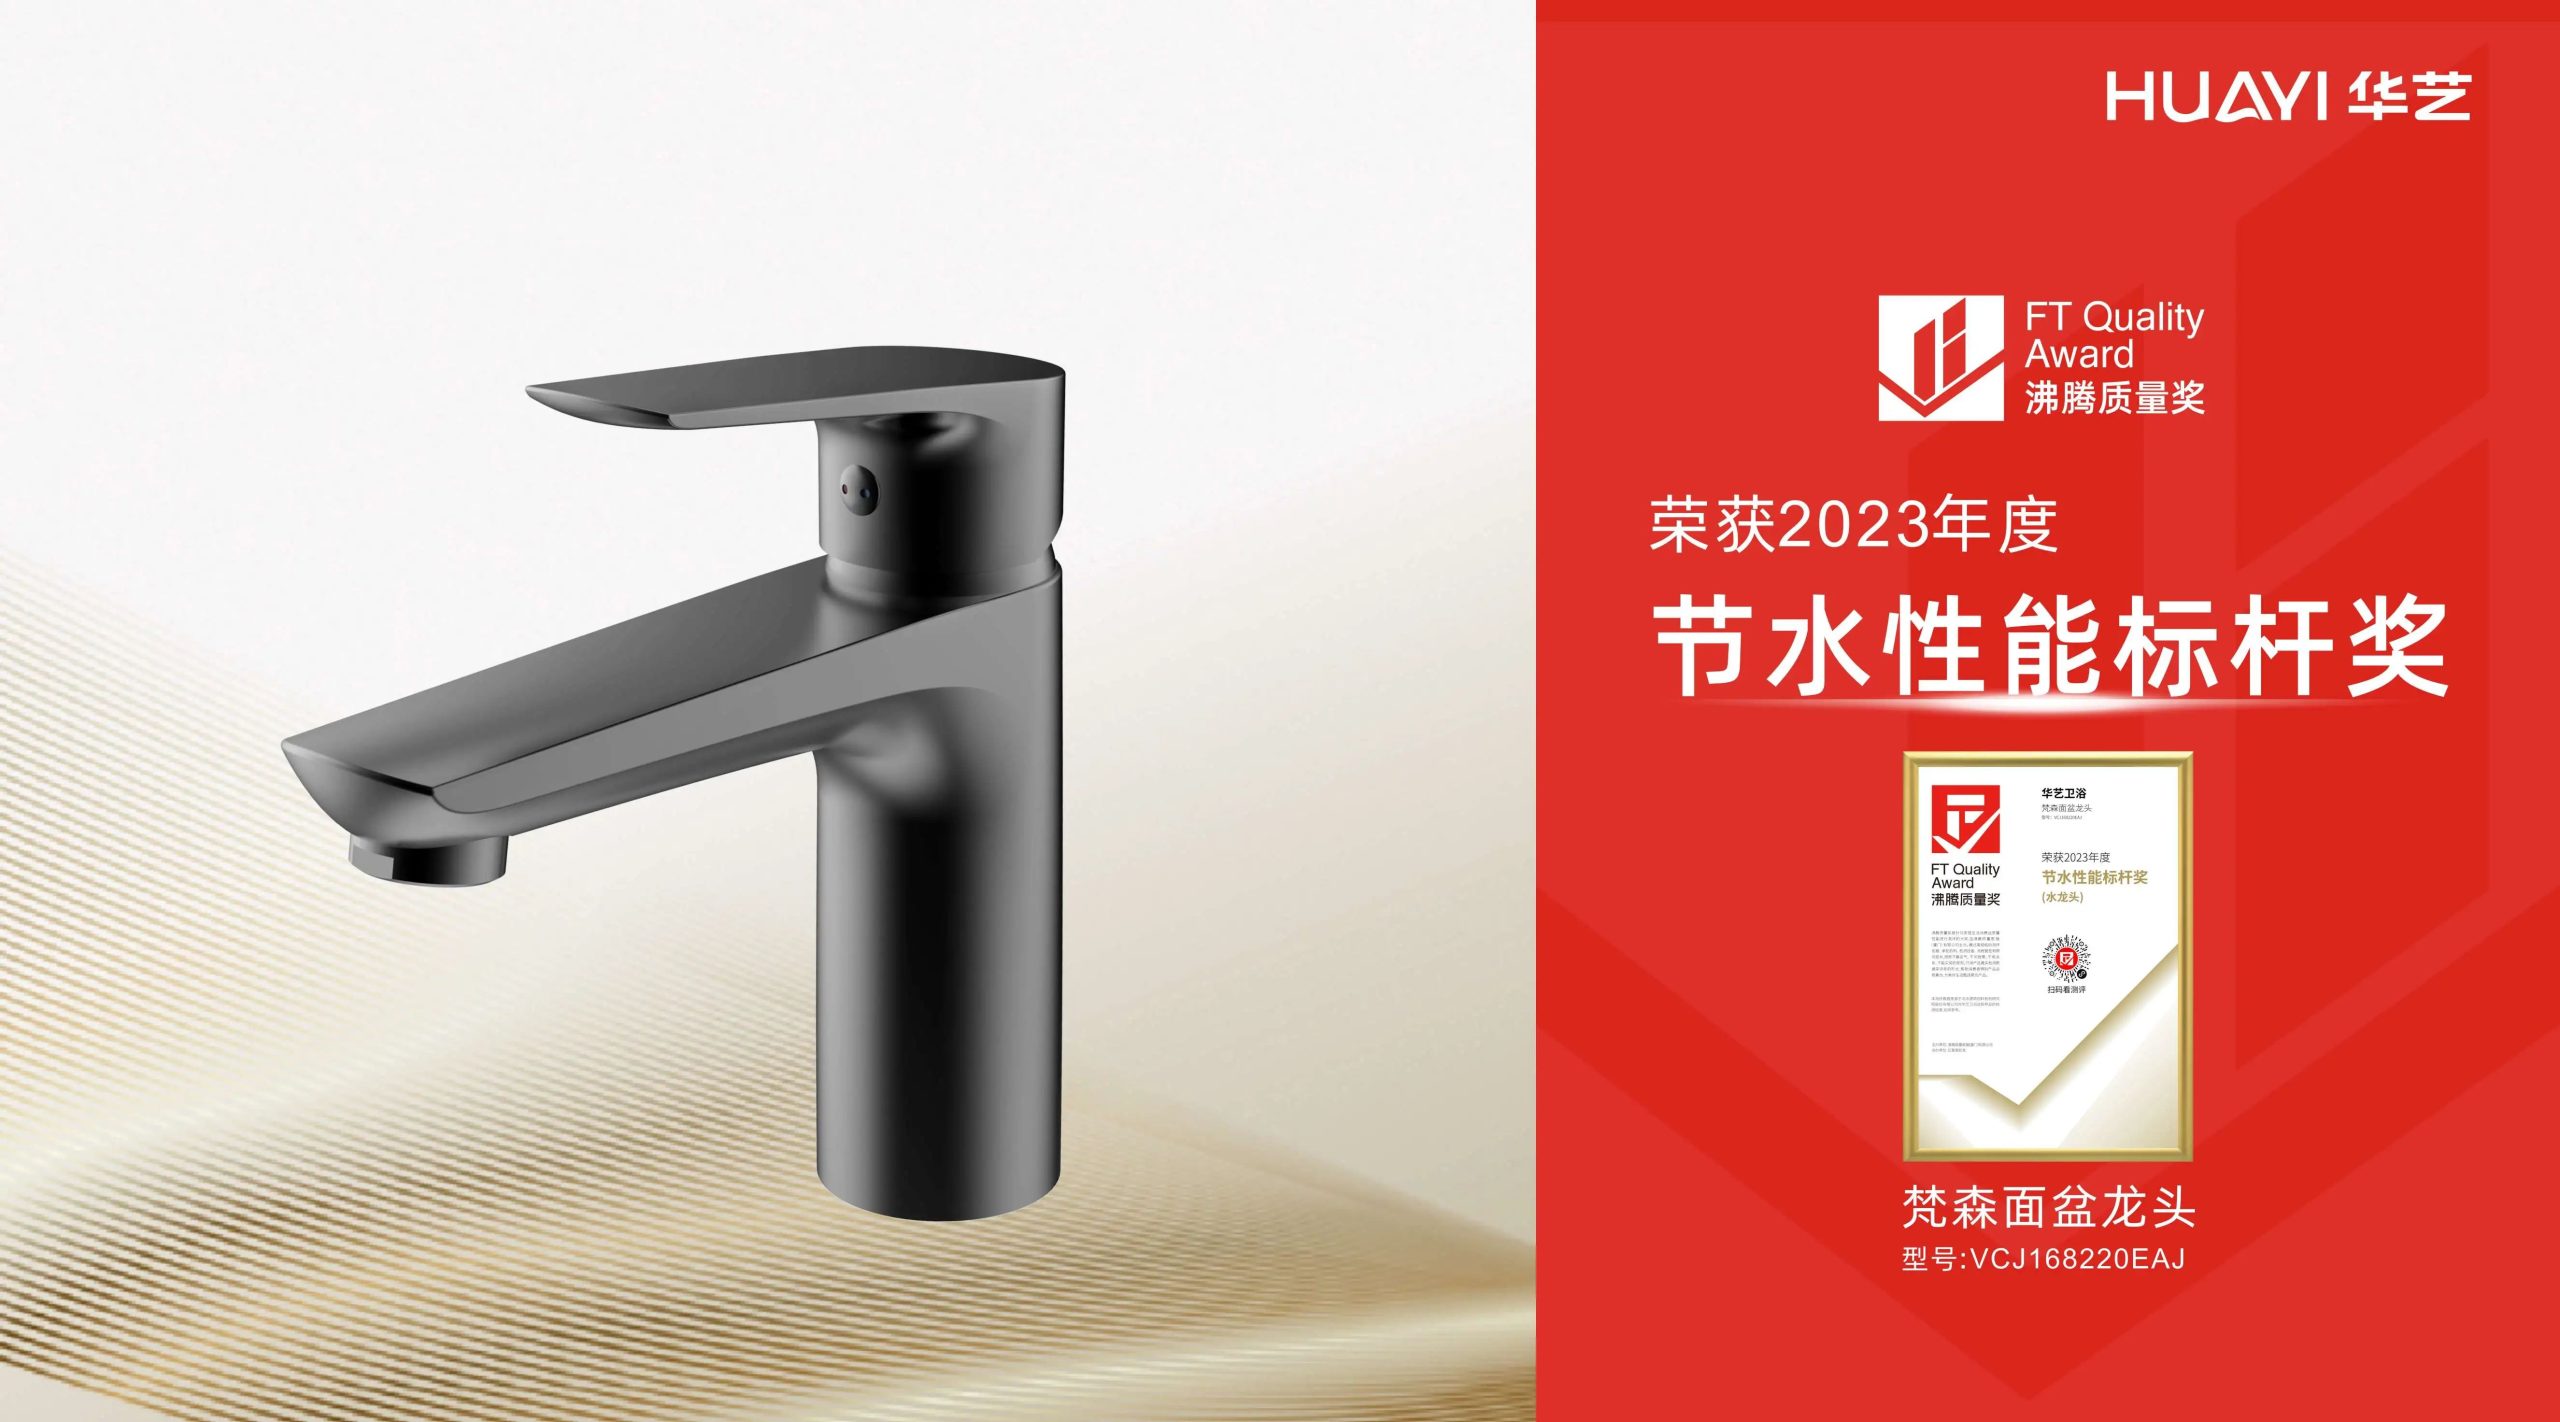 Review of the 20 most popular faucets in 2023 - News - 5